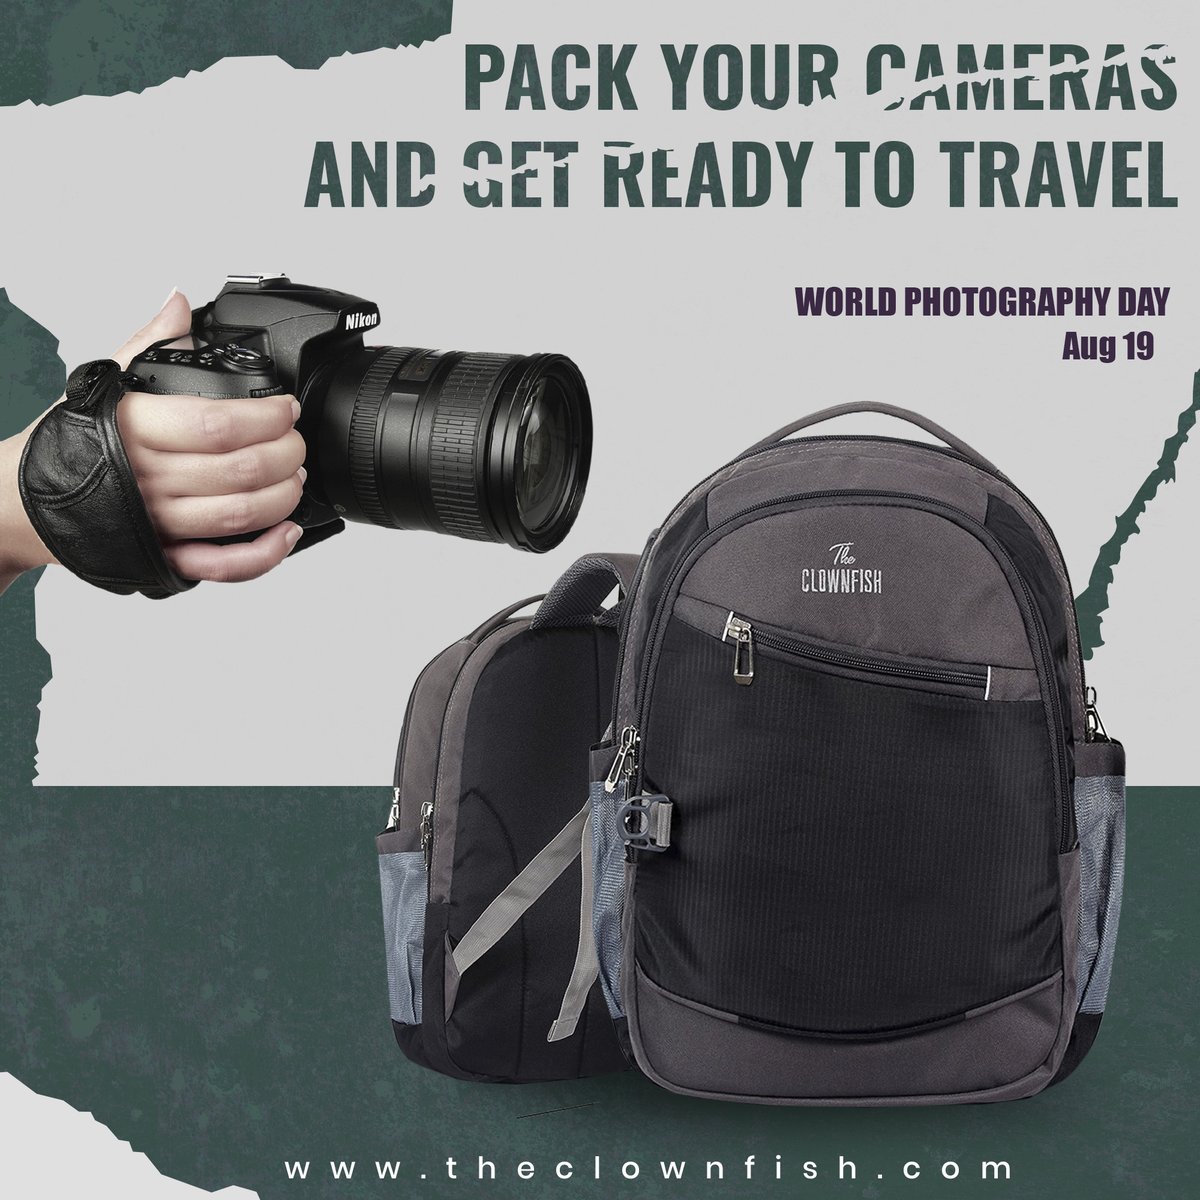 A collection designed for people who combine a special passion for photography with the love for travel

Shop now on :
theclownfish.com

#photographyday #BackPack #HyperFunctional #BestCompanion  #SafeTravel #SpaciousBags #Bags #camerabackpack #travelphotography